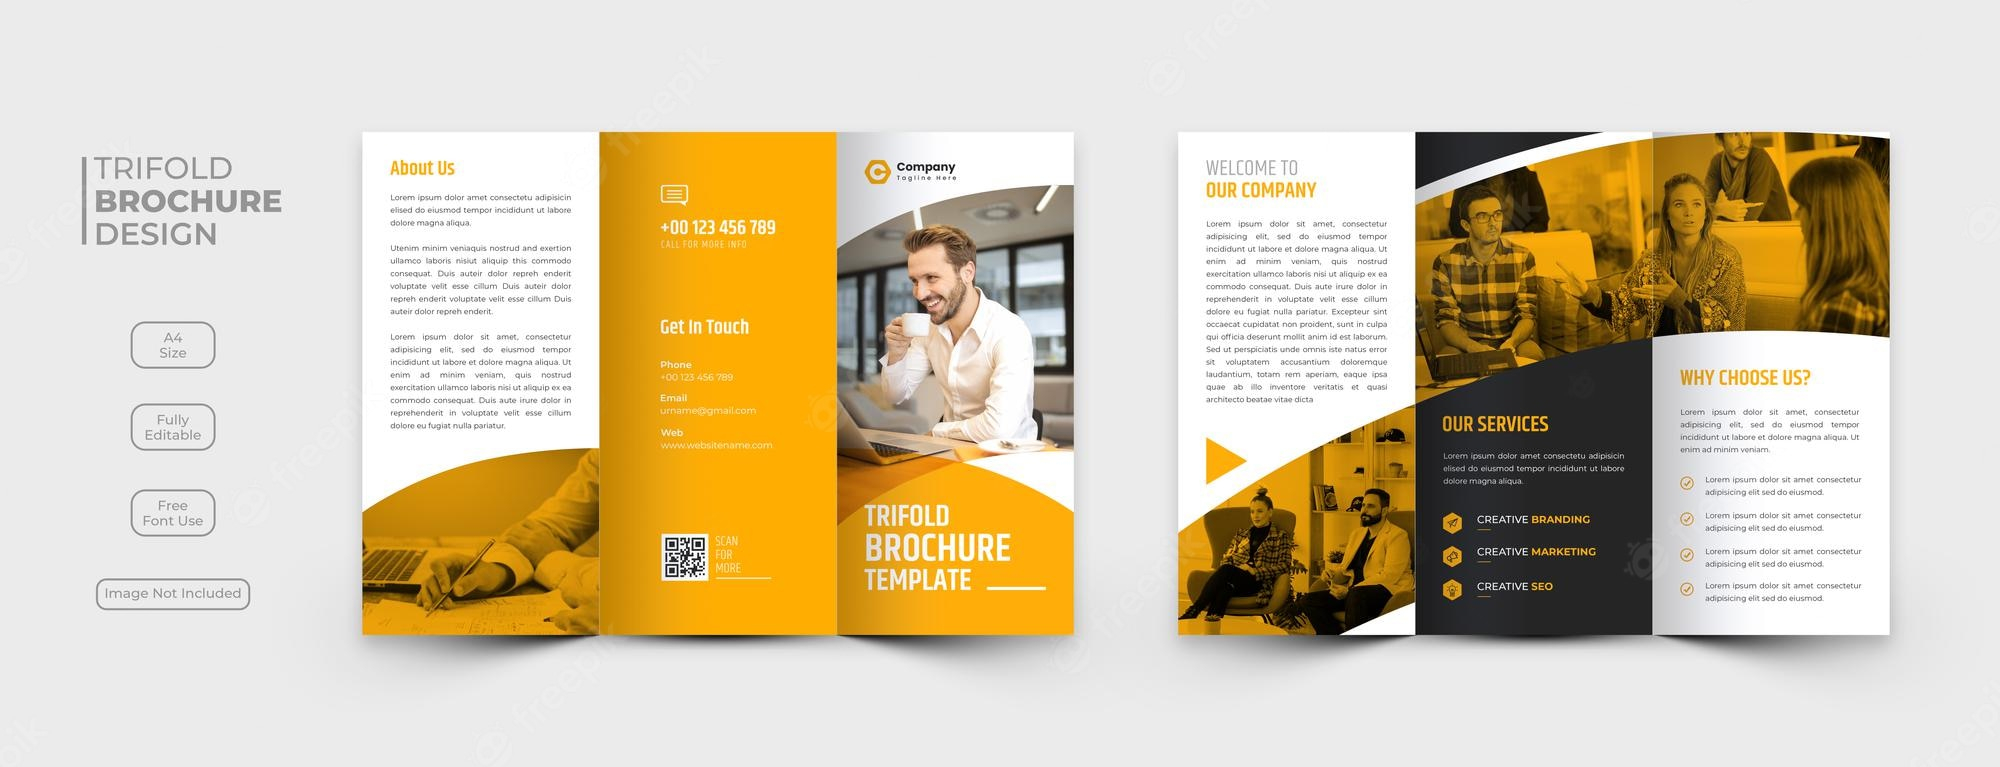 Brochure PSD, 10,10+ High Quality Free PSD Templates For Download In Brochure 3 Fold Template Psd